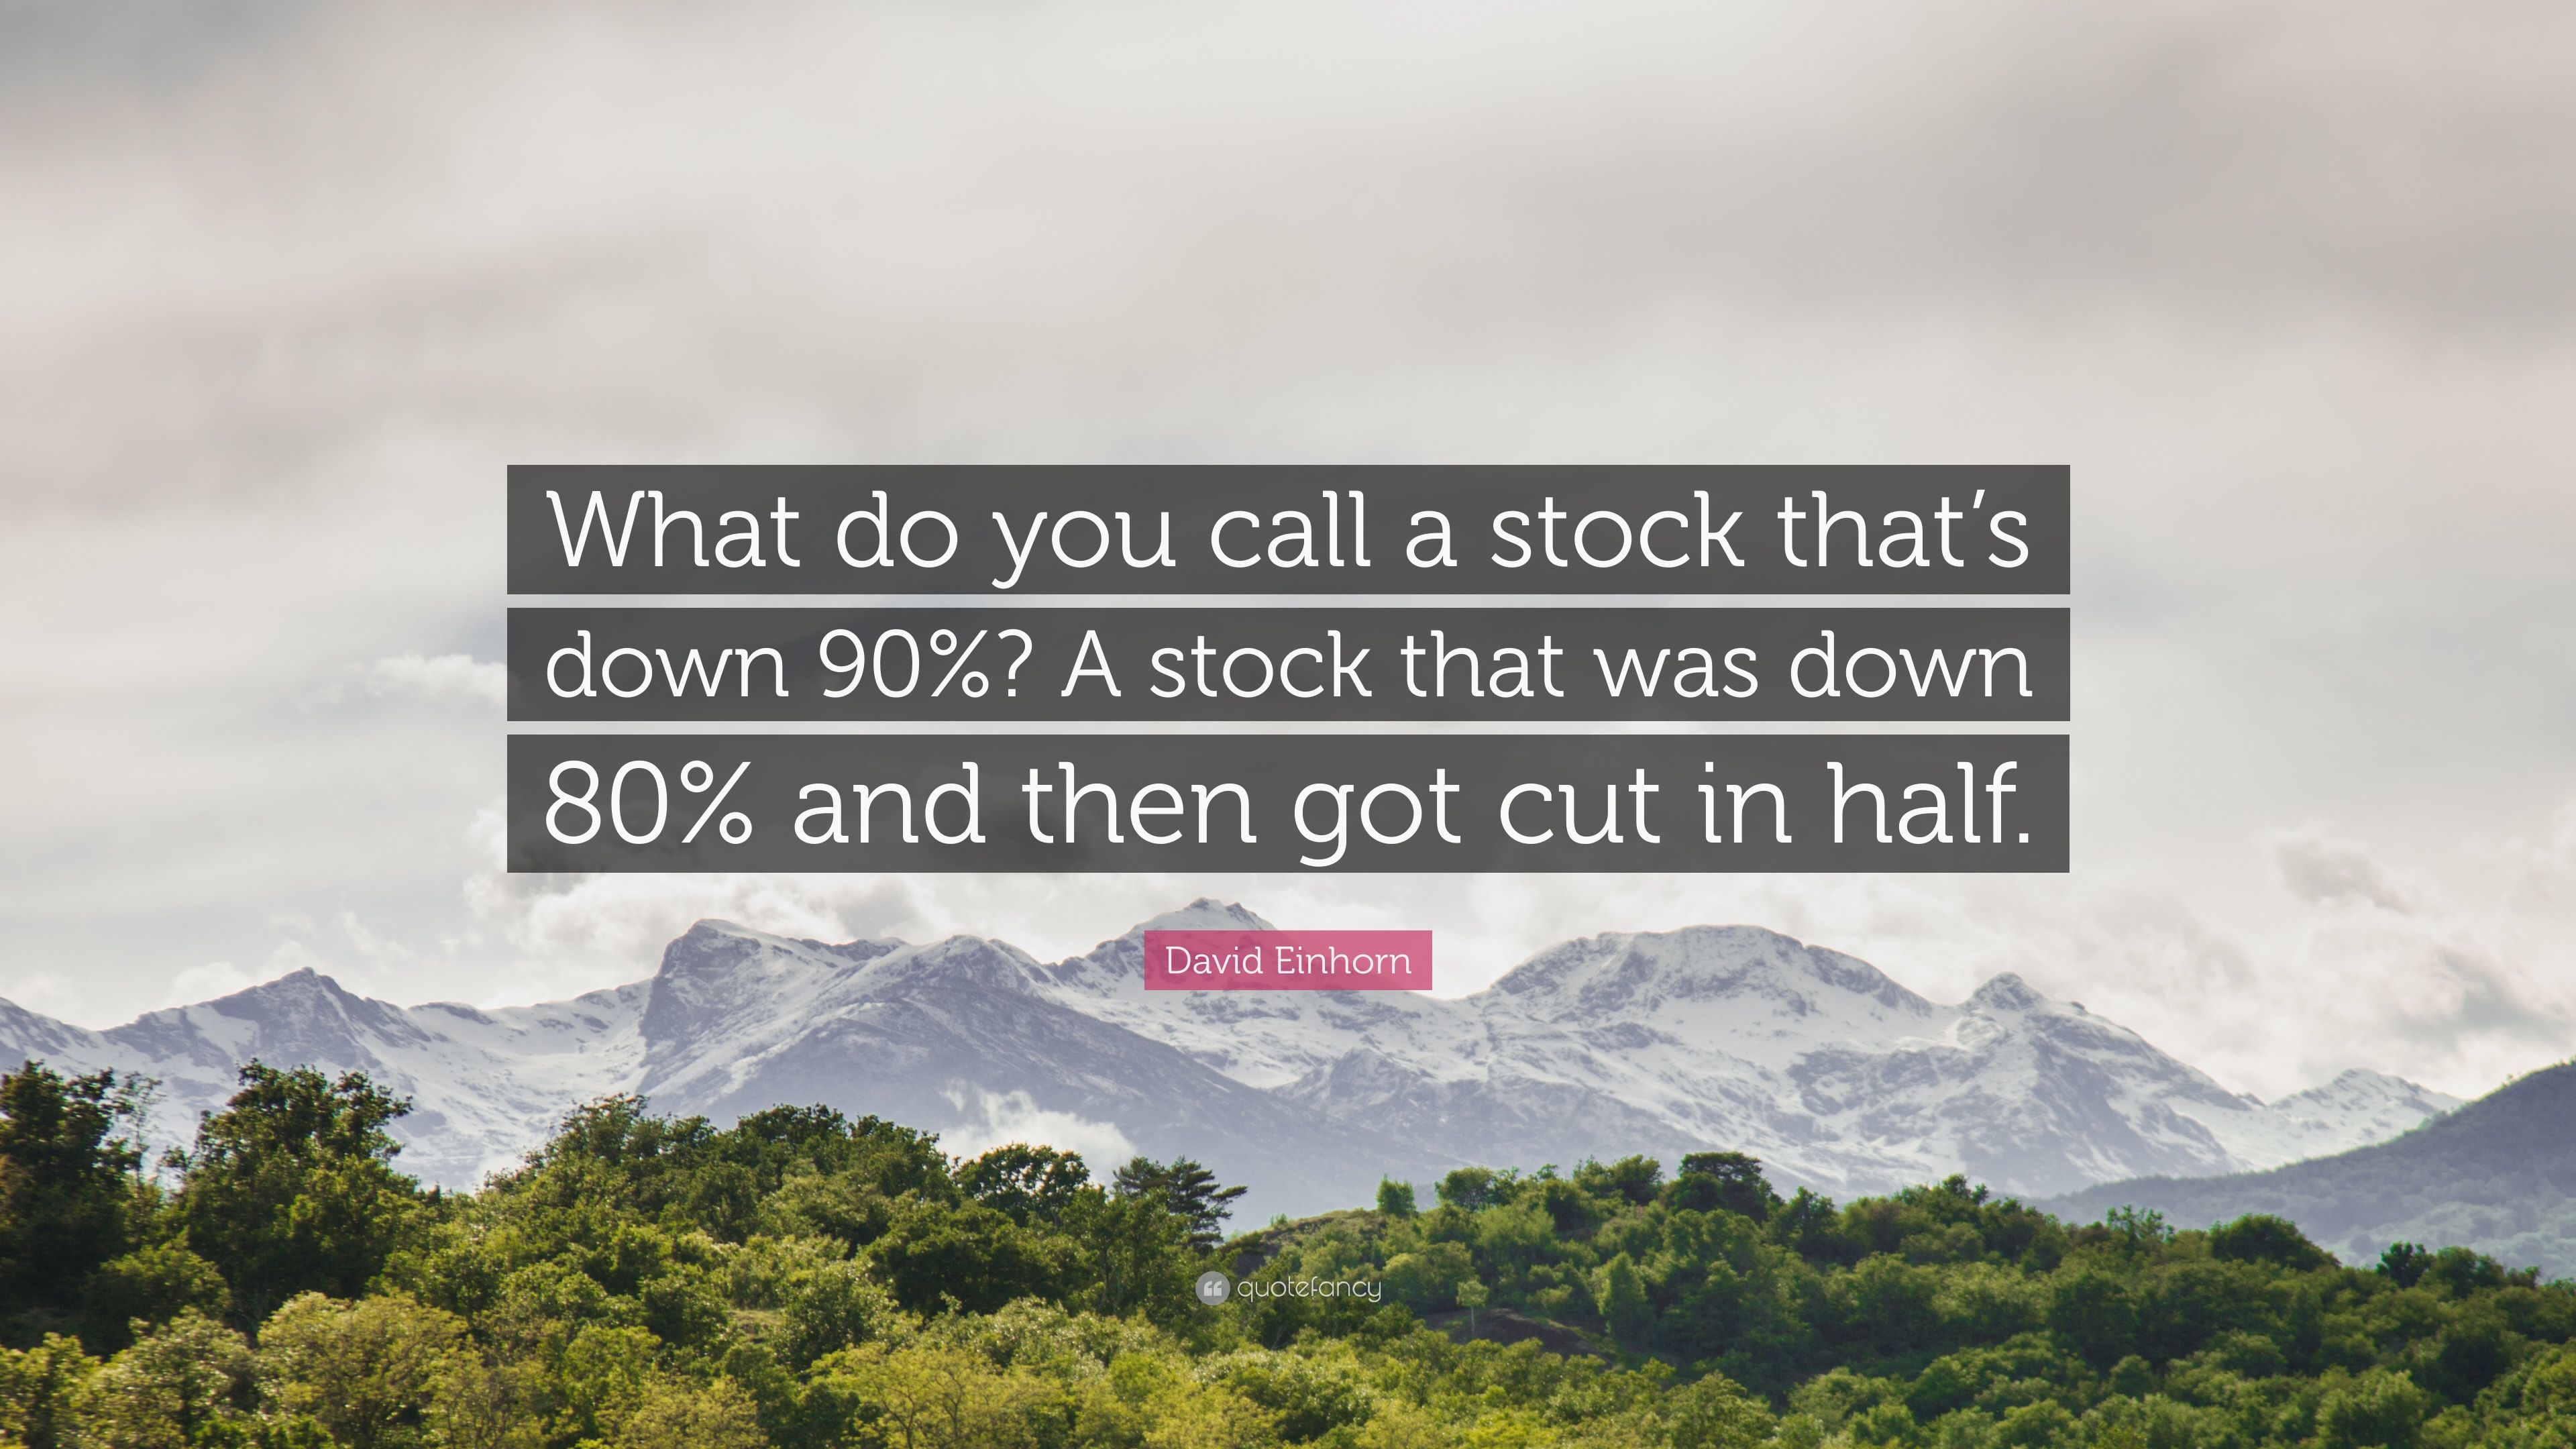 David Einhorn Quote: “What do you call a stock that's down 90%? A